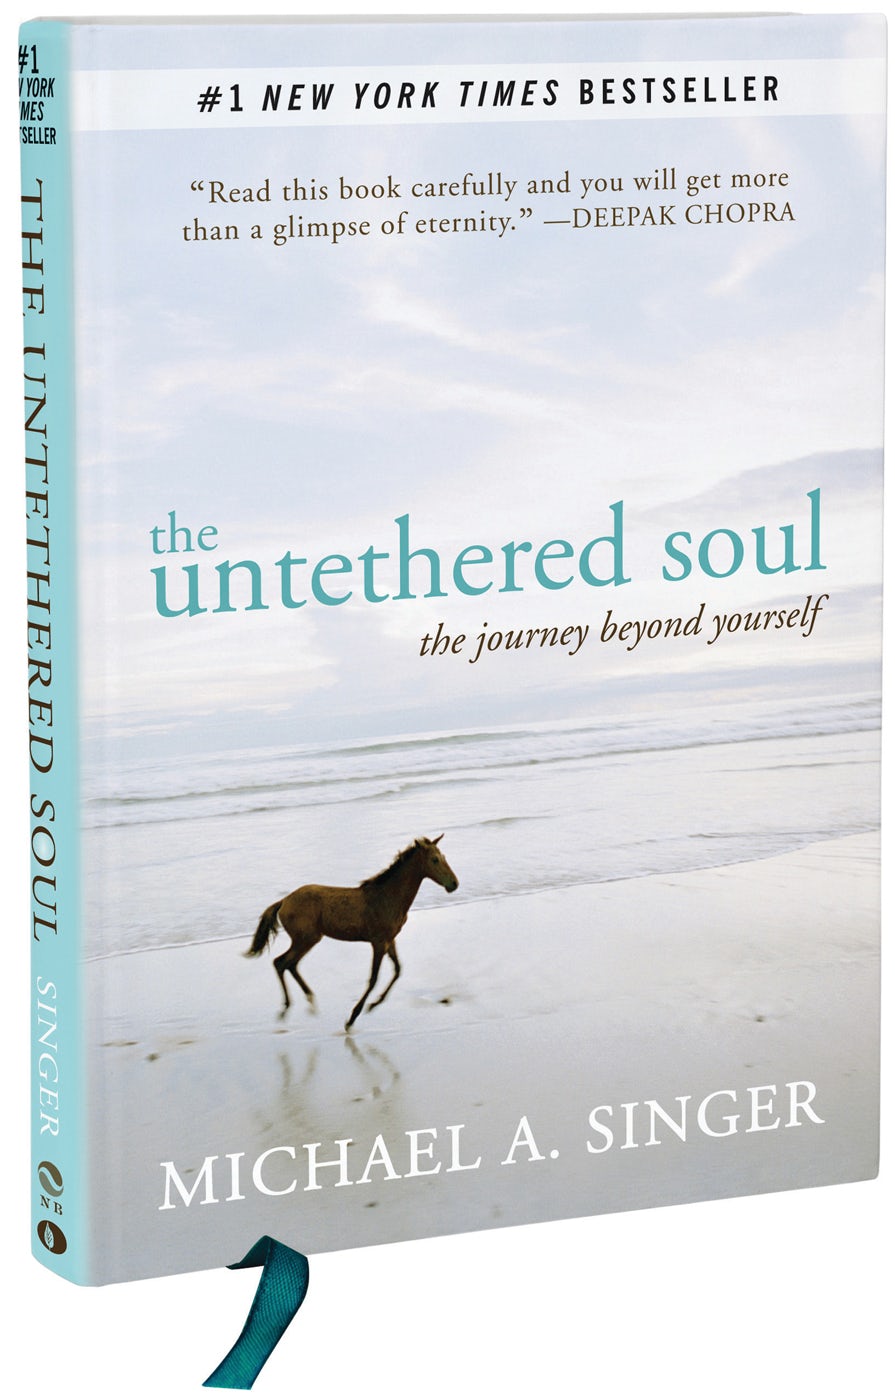 the untethered soul guided journal